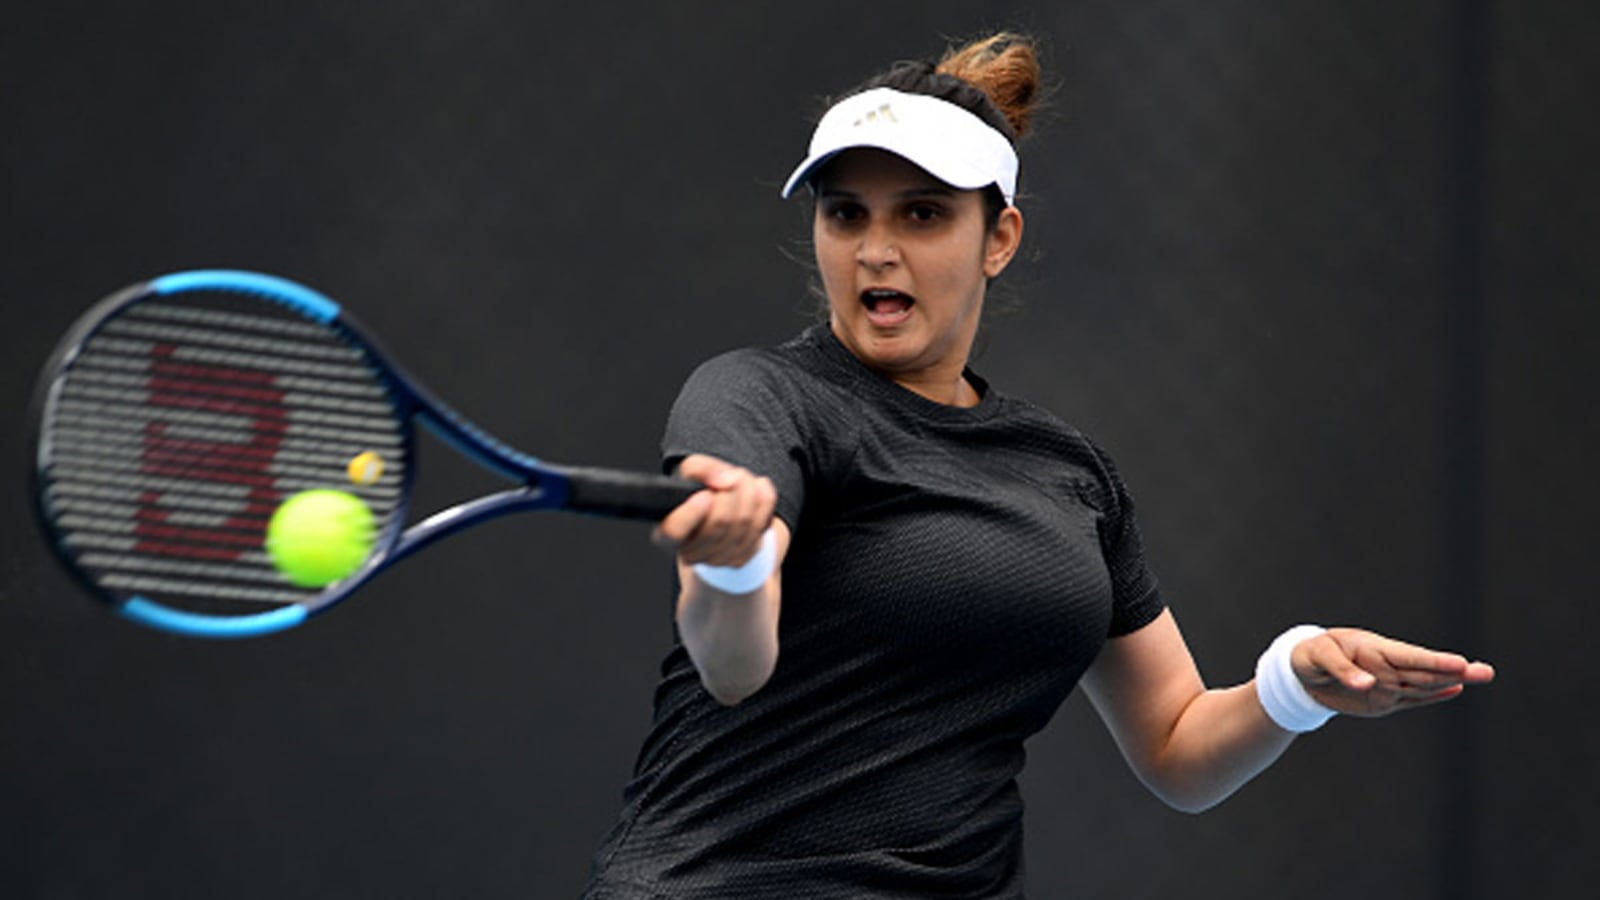 Tennis Player Sania Mirza Sex Videos - For Sania Mirza, belief to take on the best is what matters most | Tennis  News - Hindustan Times